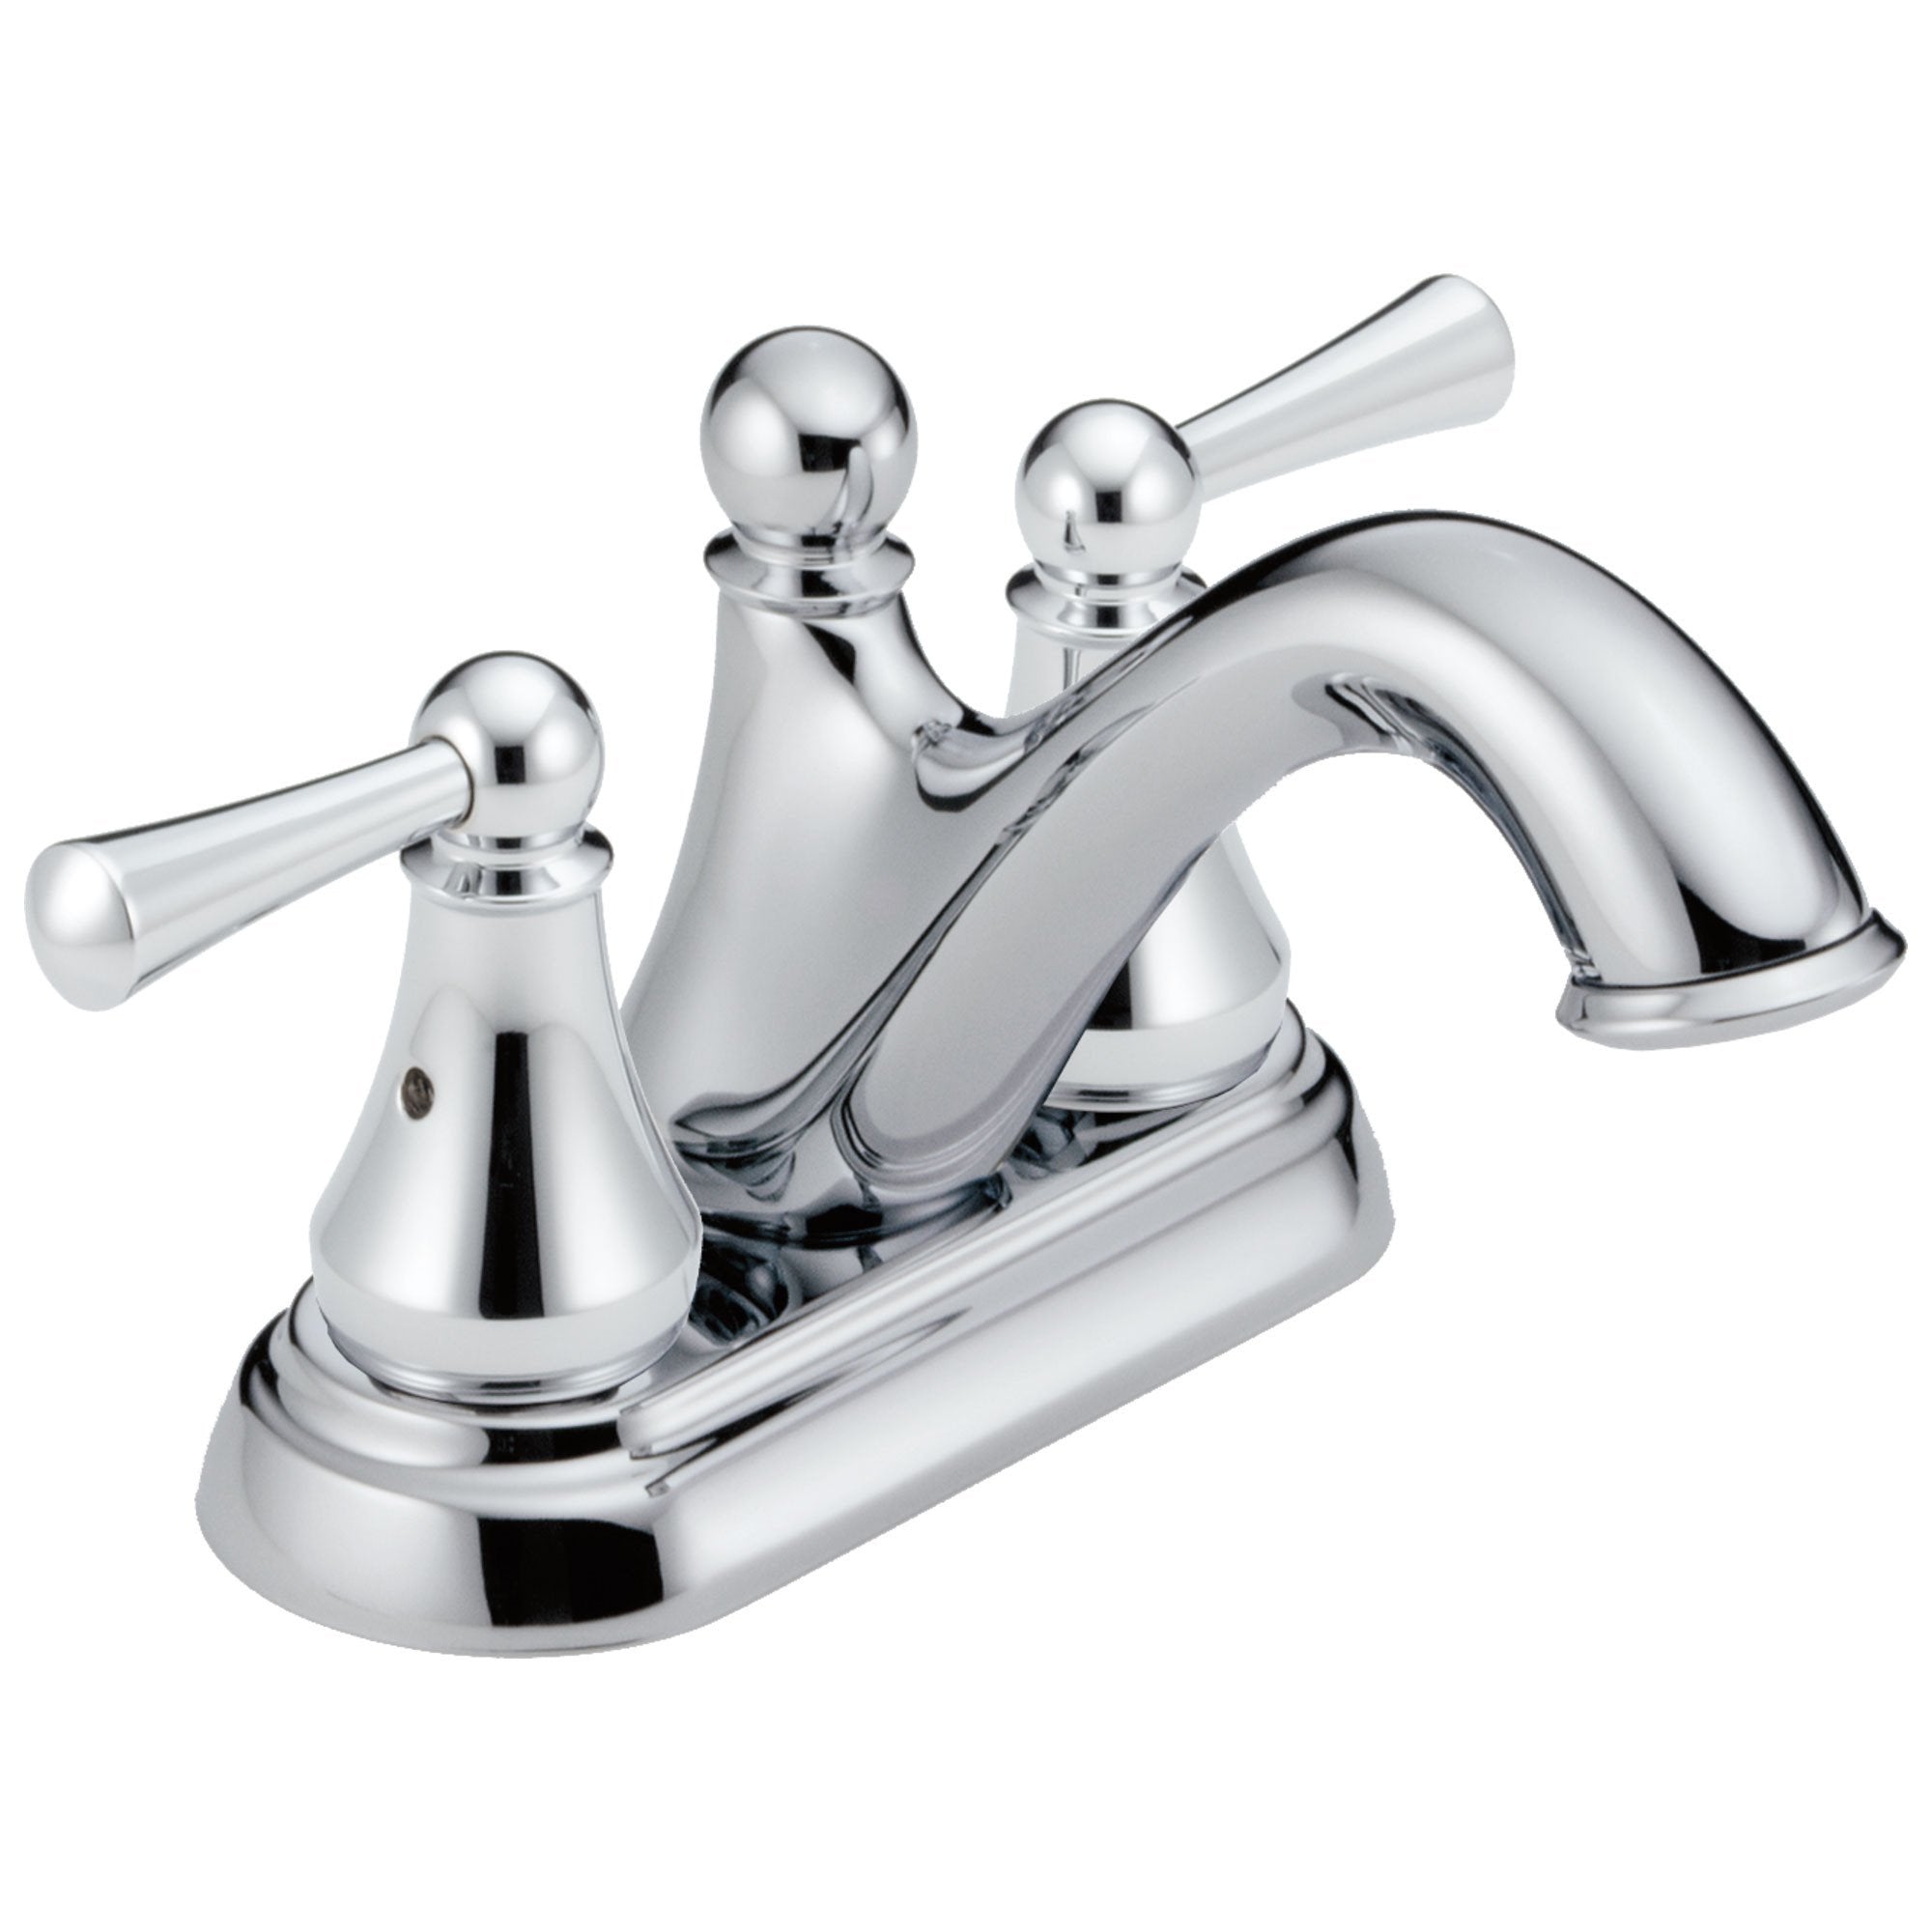 Delta Haywood Collection Chrome Finish Two Lever Handle Centerset Bathroom Sink Faucet 722475